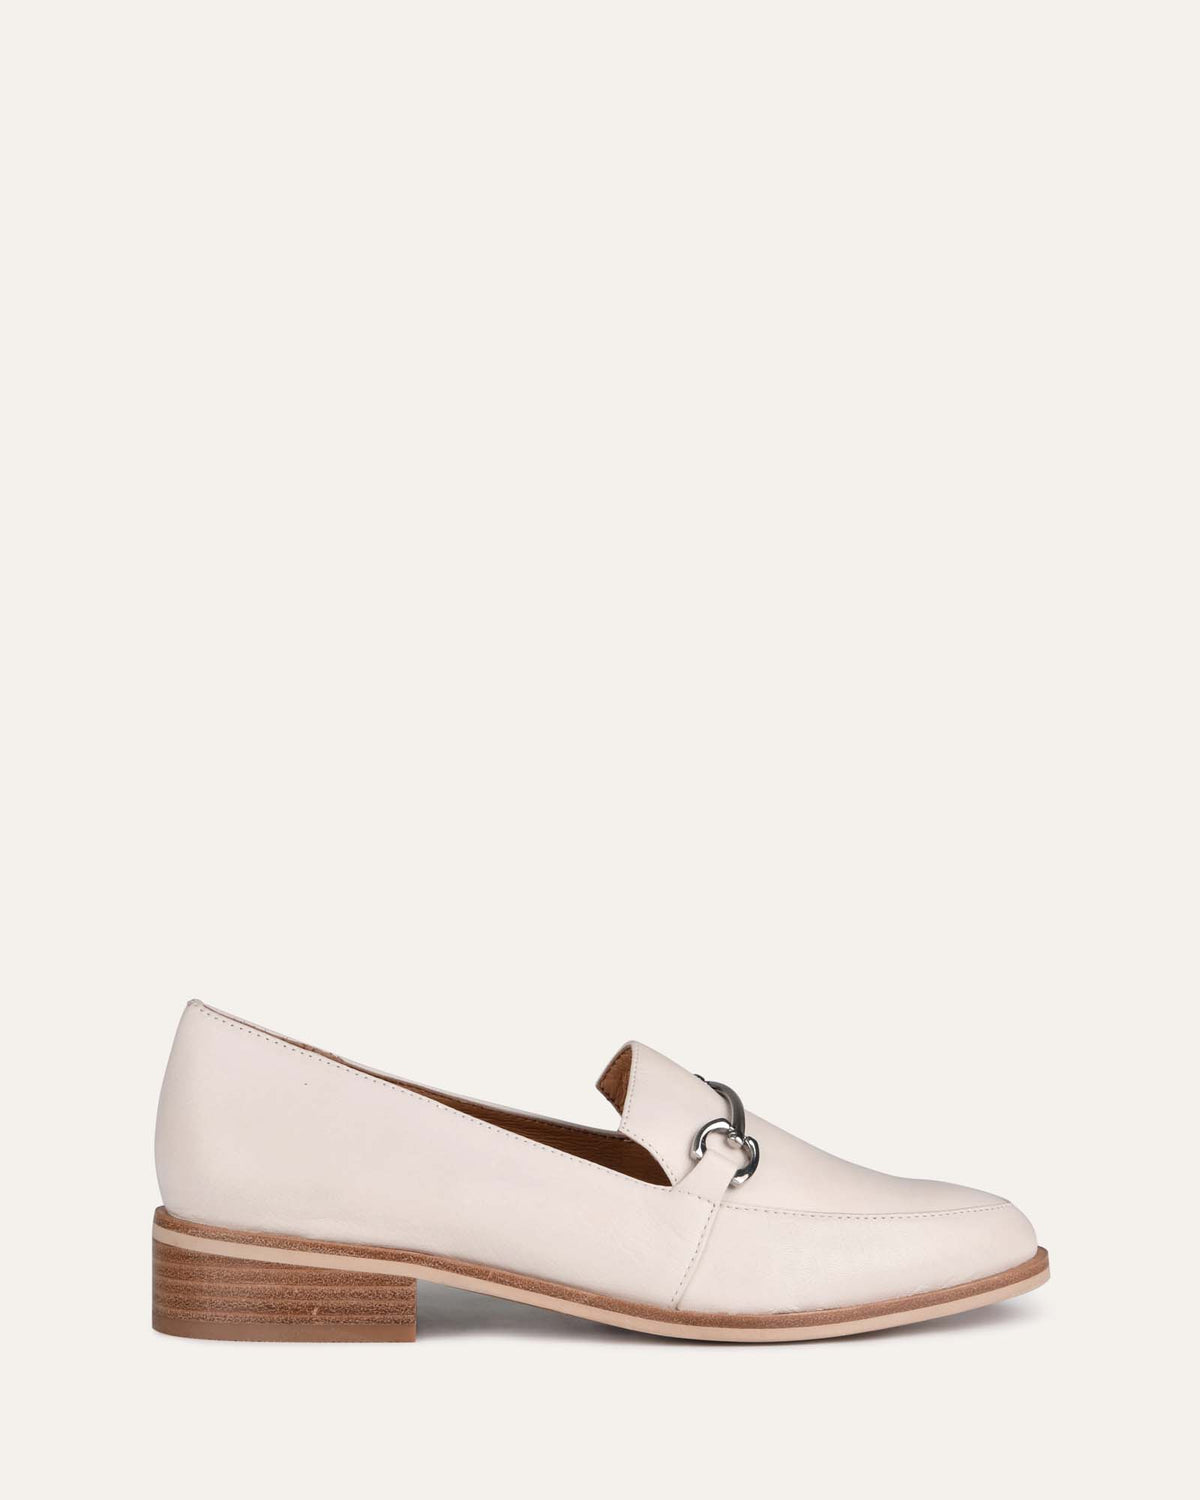 ROCKWELL LOAFERS BONE LEATHER